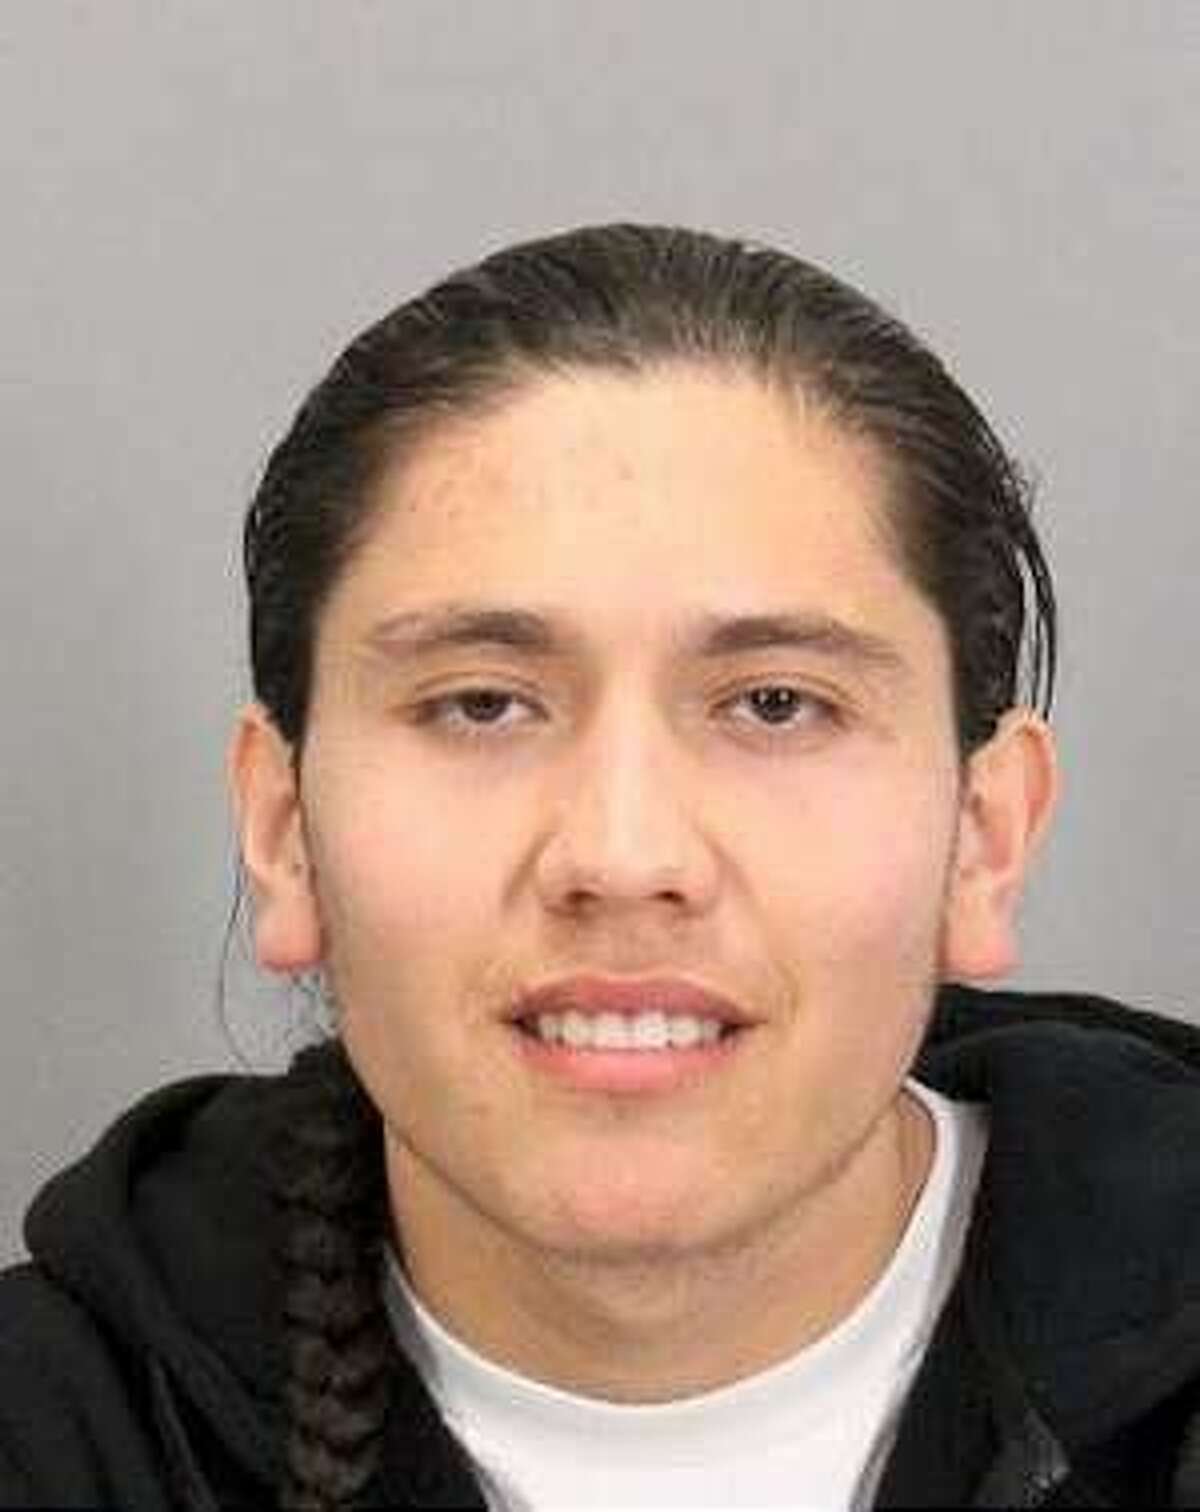 Jacob Andrew Martinez, 21, of San Jose, was�in custody at Santa Clara County Jail on unrelated charges when he was served with a warrant on one count of accessory to murder in connection to a double-shooting on May 16, 2018.